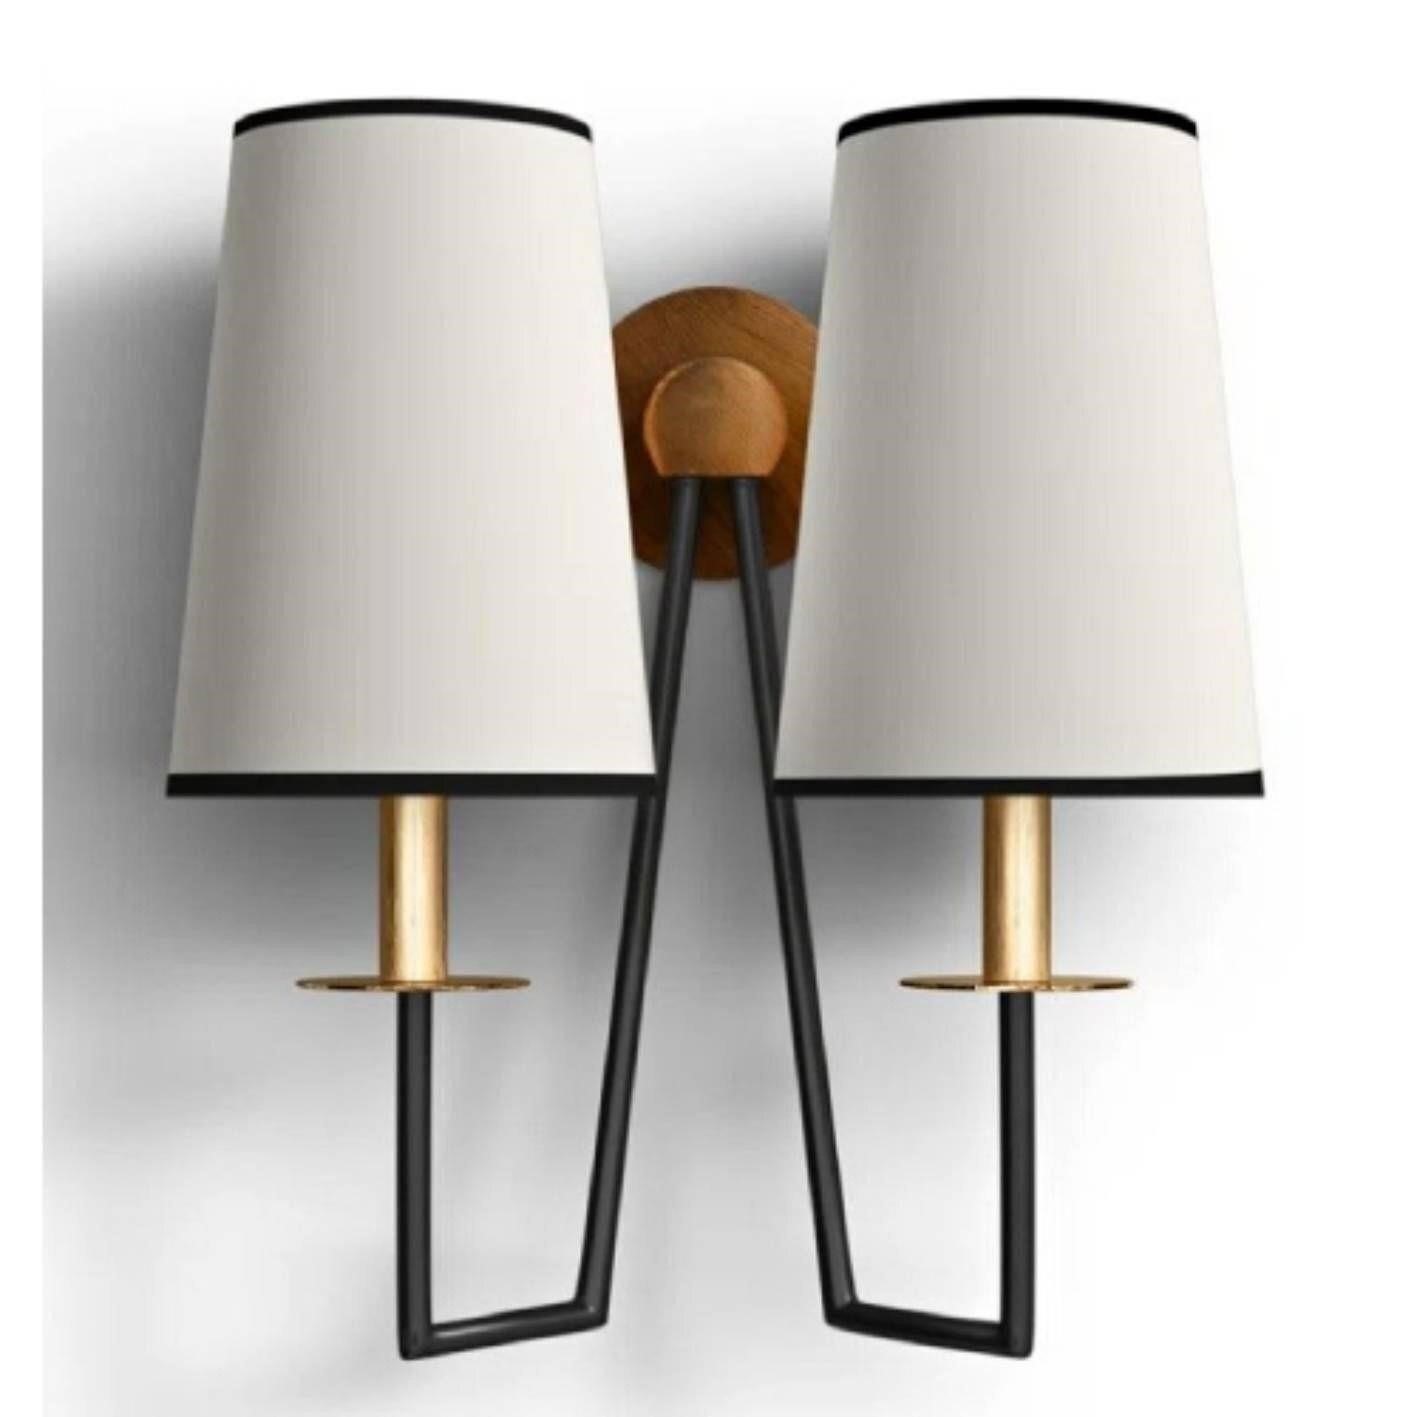 Edgecliff Armed Sconce - No Accessories Included